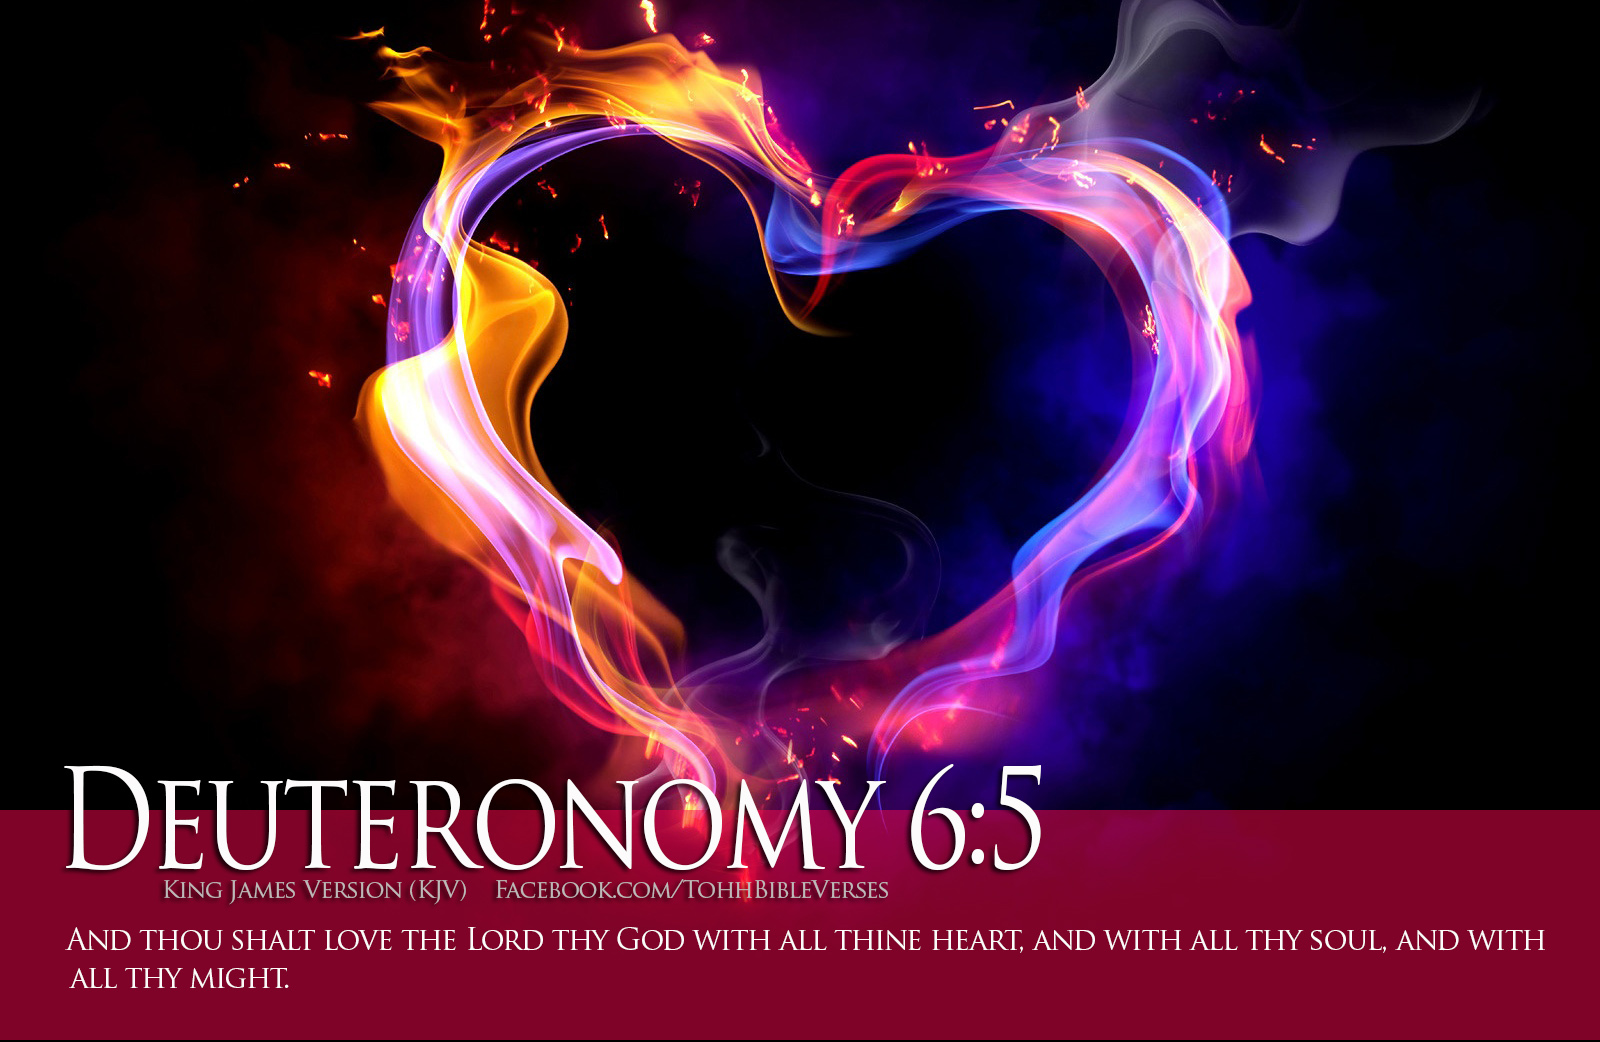 Bible-Verse-Deuteronomy-6-5-Abstract-Colorful-Fire-Heart-HD-Wallpaper-Background